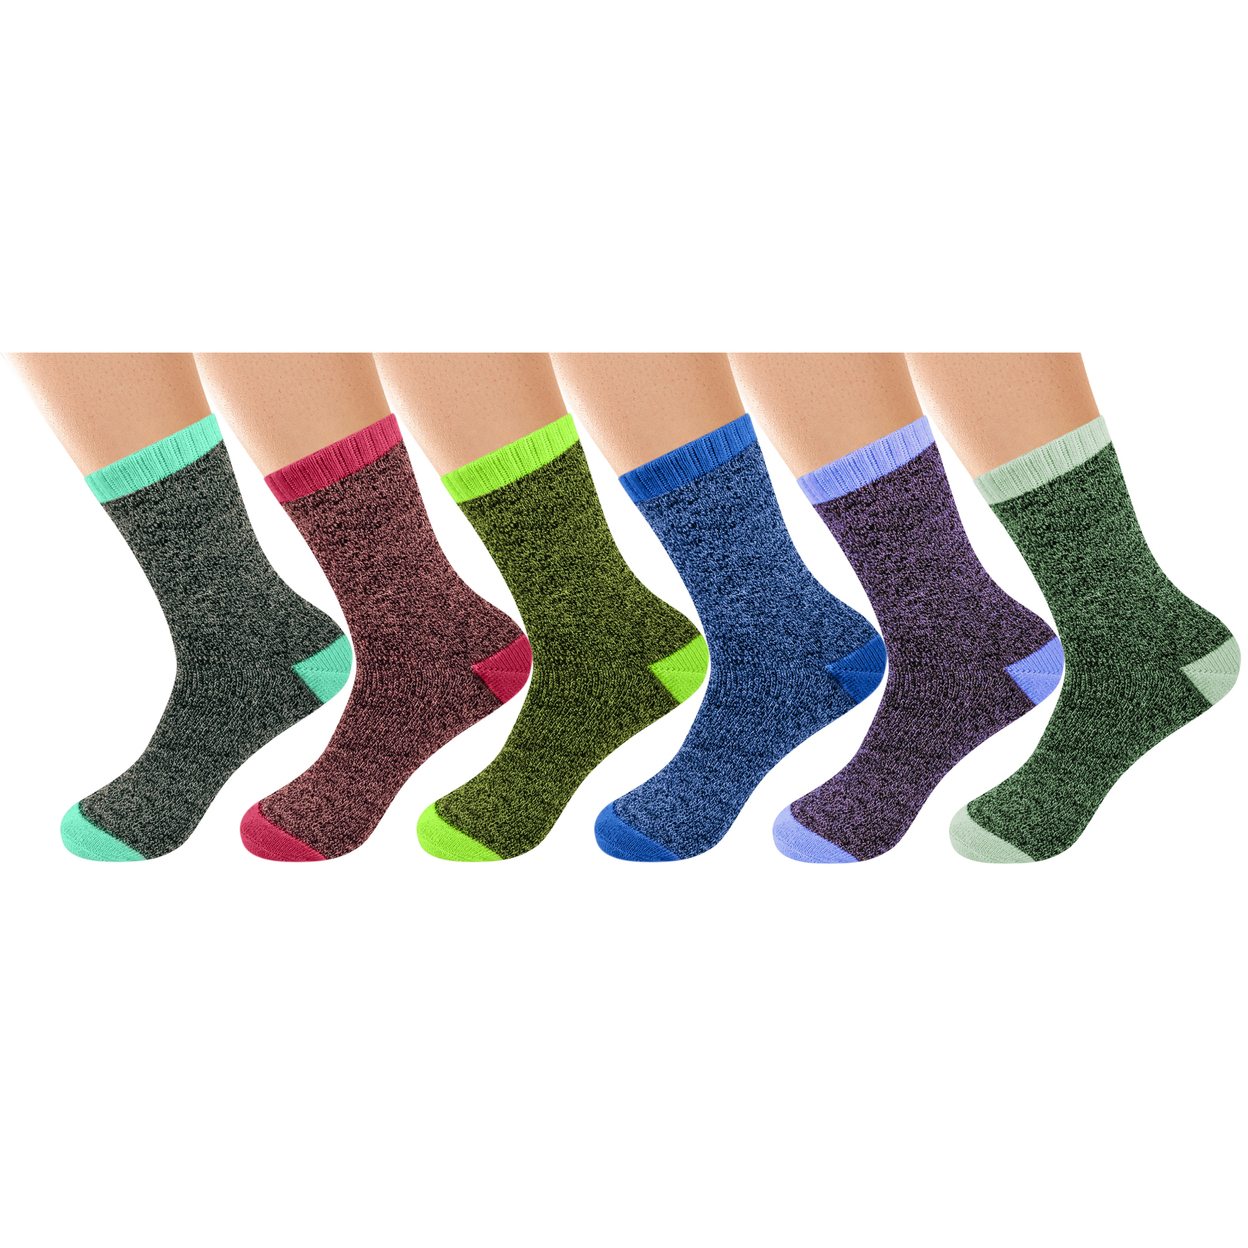 6-Pairs: Women's Winter Warm Thick Soft Cozy Thermal Boot Socks